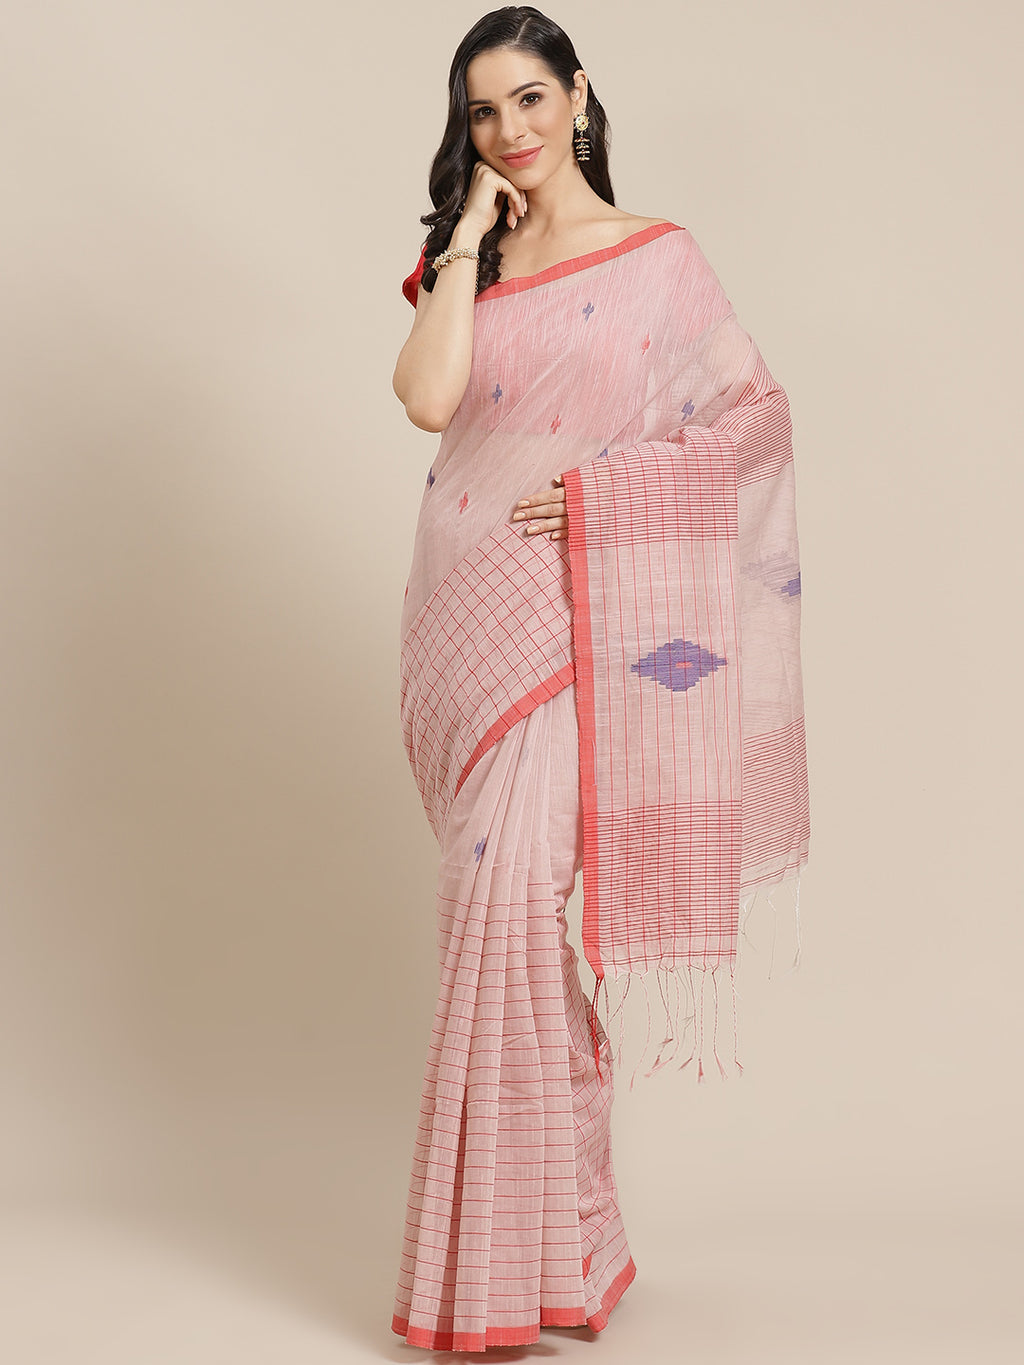 Pink and Red, Kalakari India Ikat Silk Cotton Woven Design Saree with Blouse SHBESA0055-Saree-Kalakari India-SHBESA0055-Bengal, Cotton, Geographical Indication, Hand Crafted, Heritage Prints, Ikkat, Natural Dyes, Red, Sarees, Sustainable Fabrics, Woven, Yellow-[Linen,Ethnic,wear,Fashionista,Handloom,Handicraft,Indigo,blockprint,block,print,Cotton,Chanderi,Blue, latest,classy,party,bollywood,trendy,summer,style,traditional,formal,elegant,unique,style,hand,block,print, dabu,booti,gift,present,glam